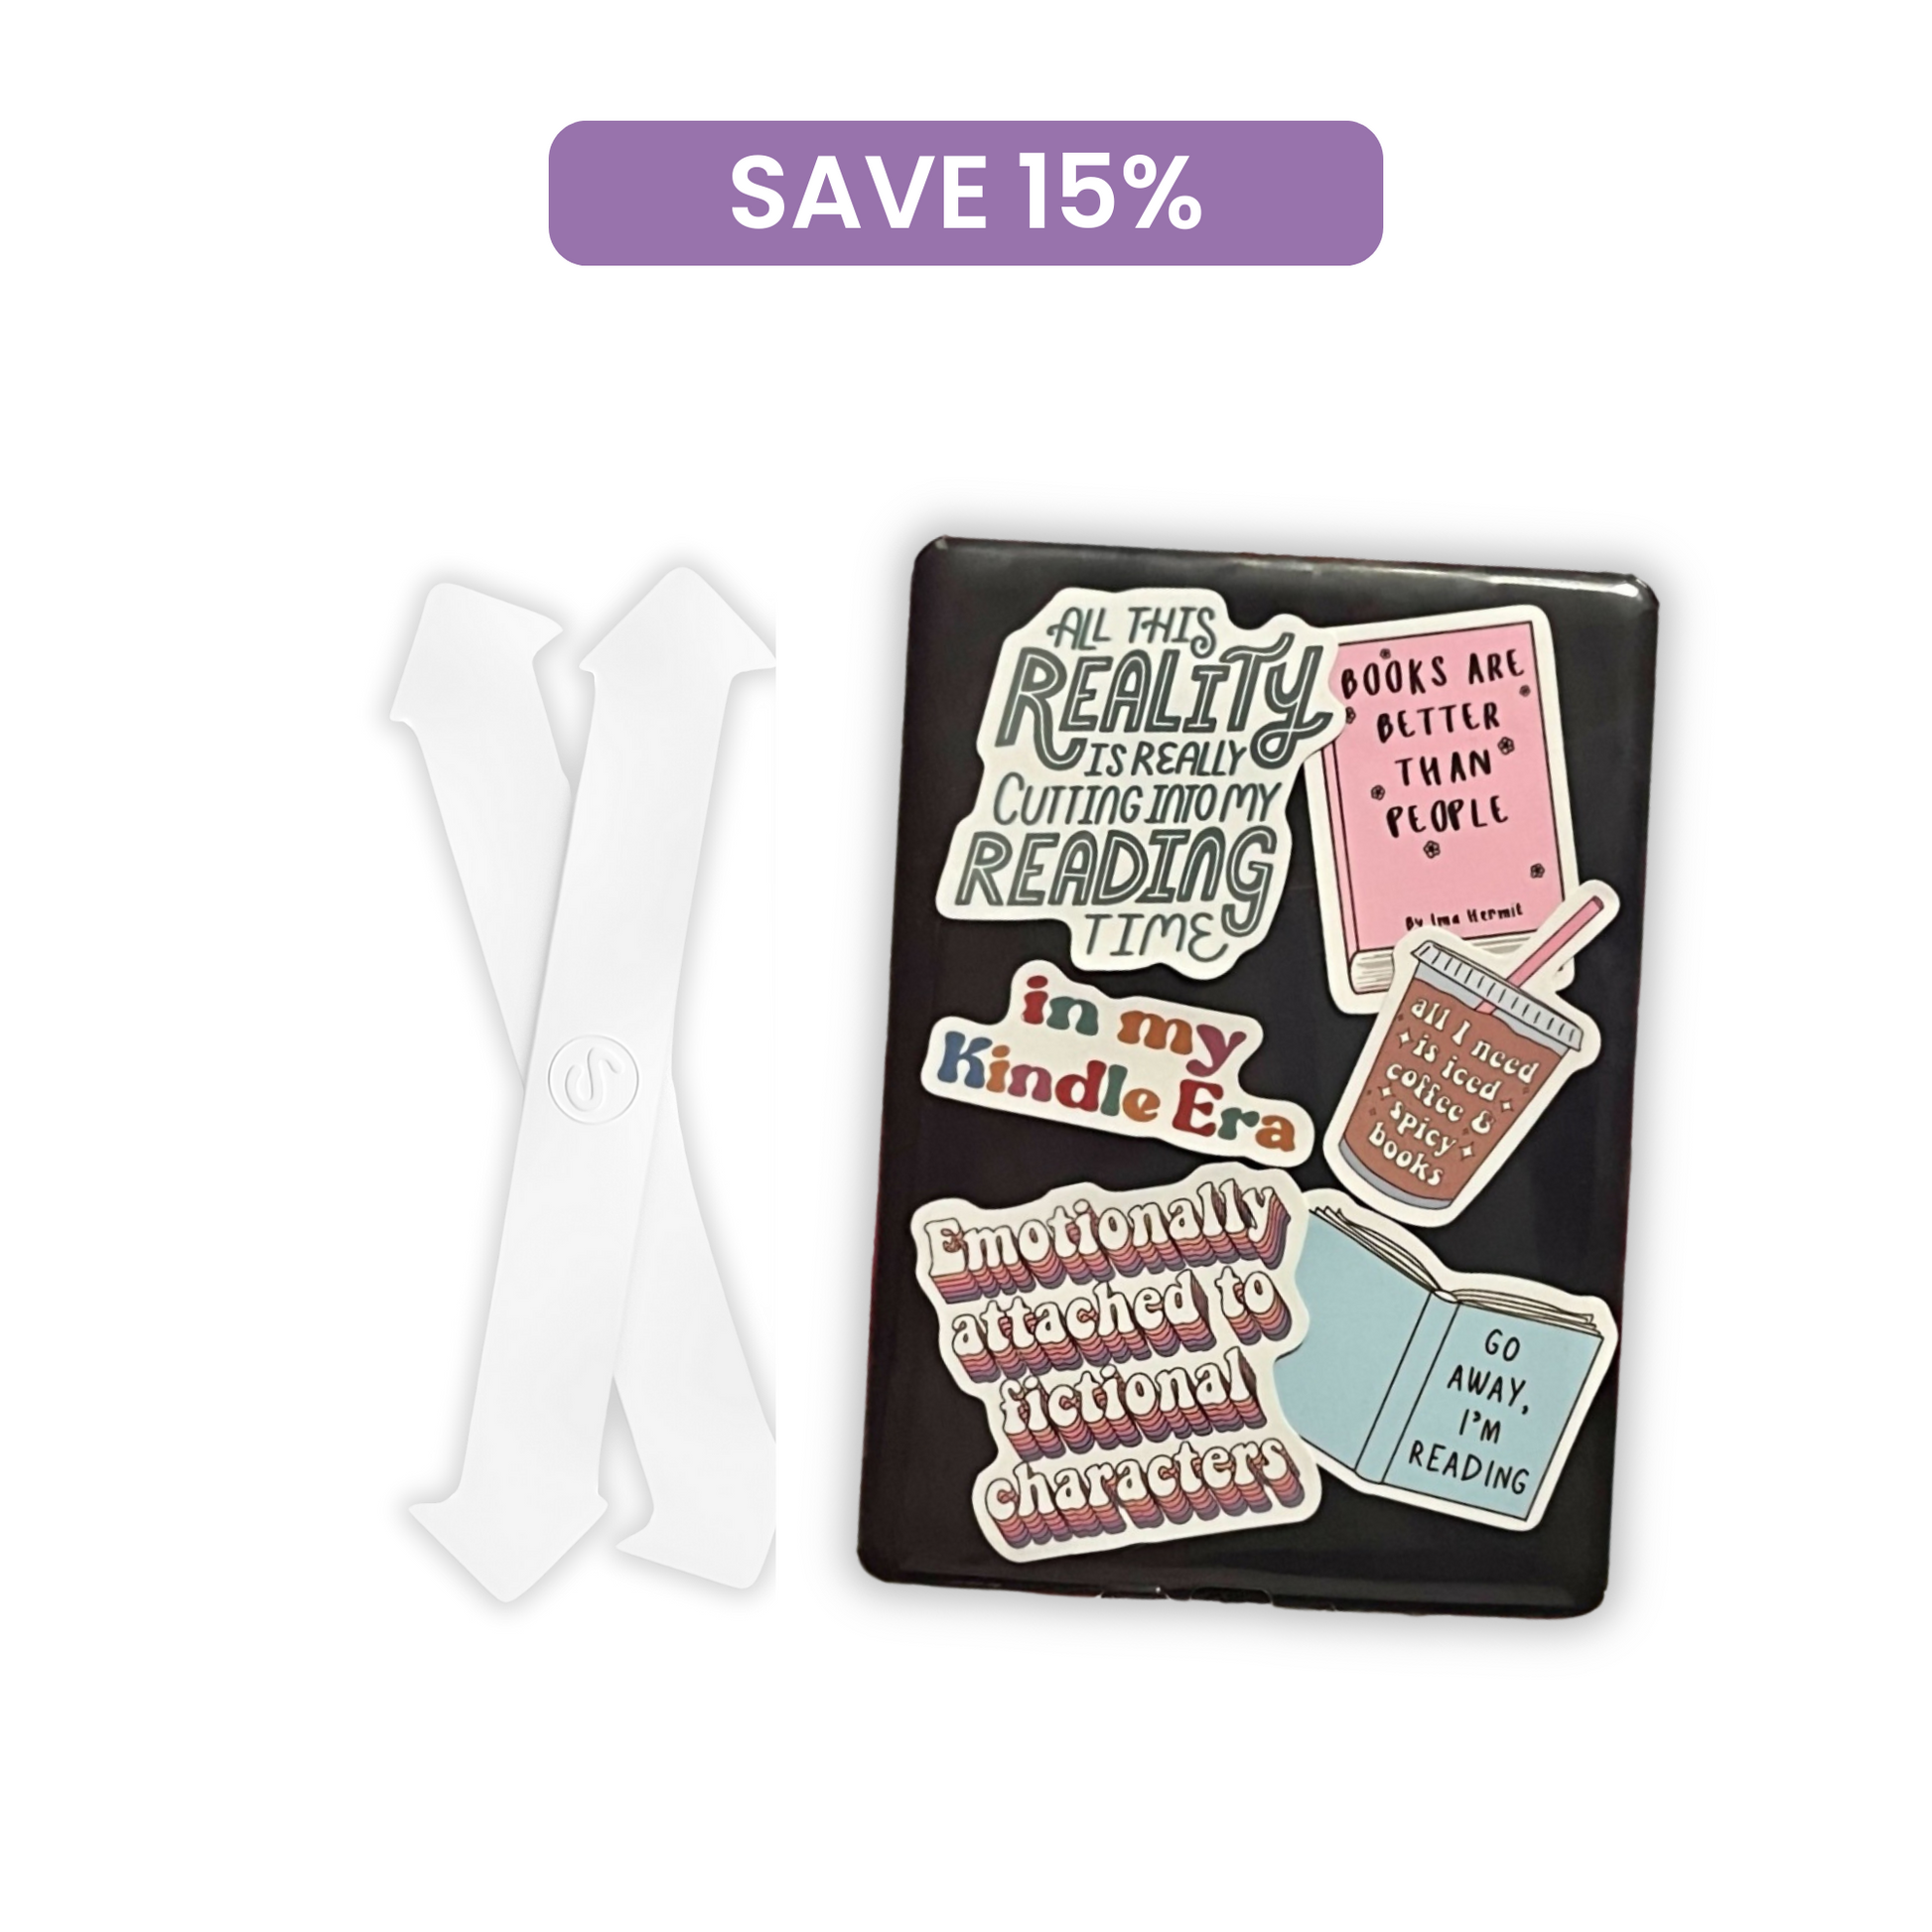 Kindle clear case straps and stickers bundle